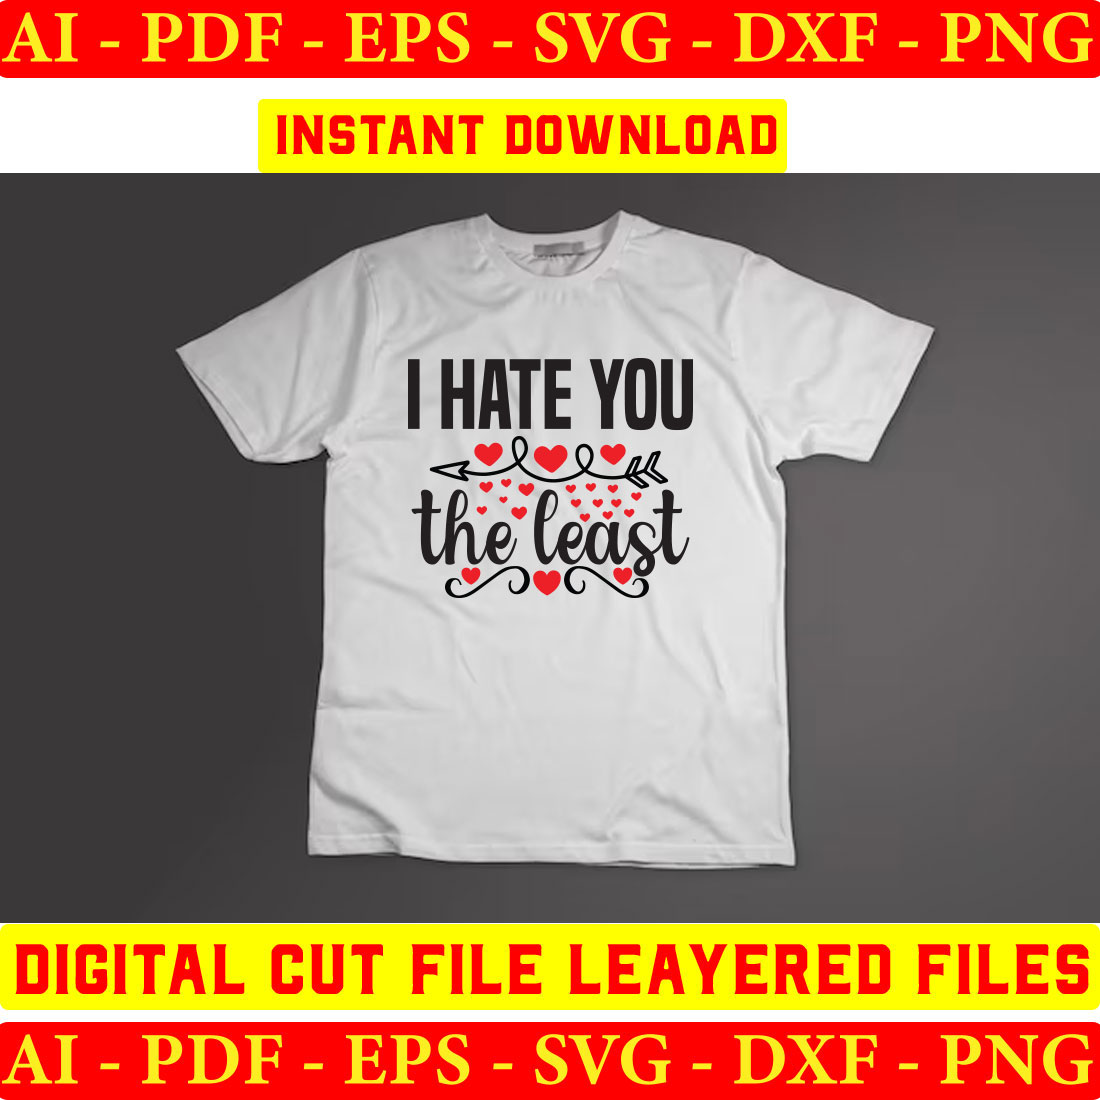 T - shirt that says i hate you the least.